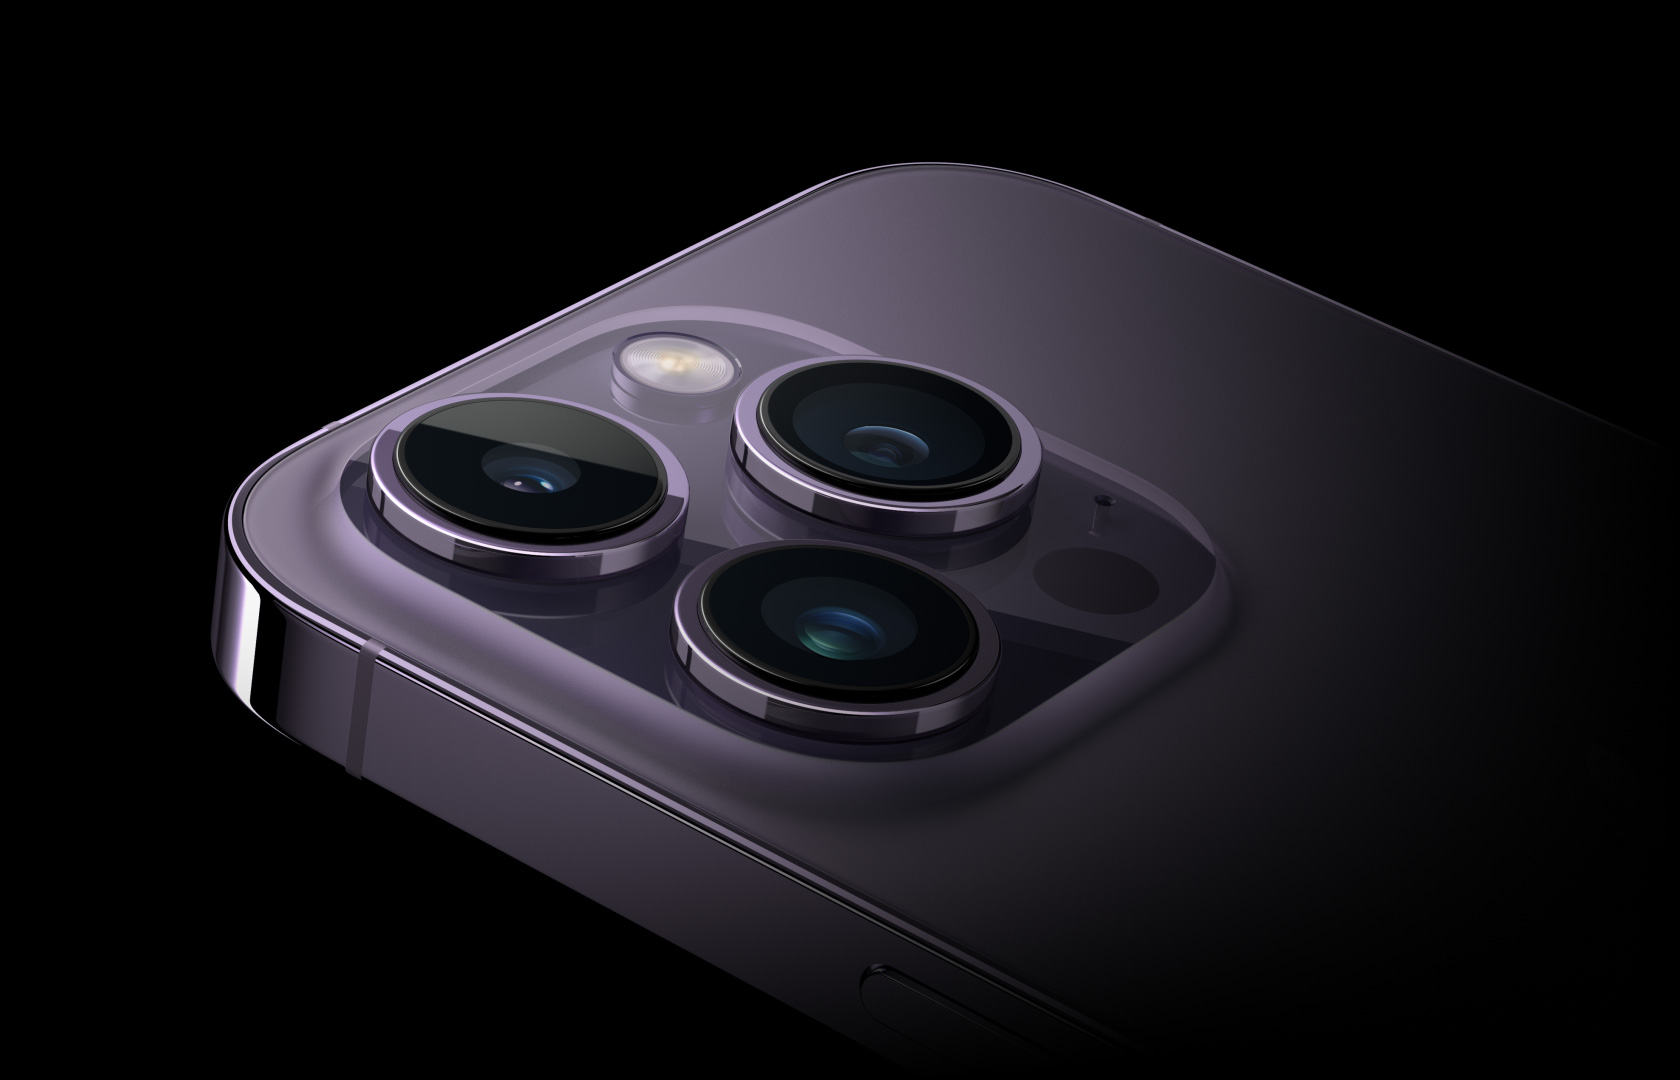 A close up view of iPhone 14's camera